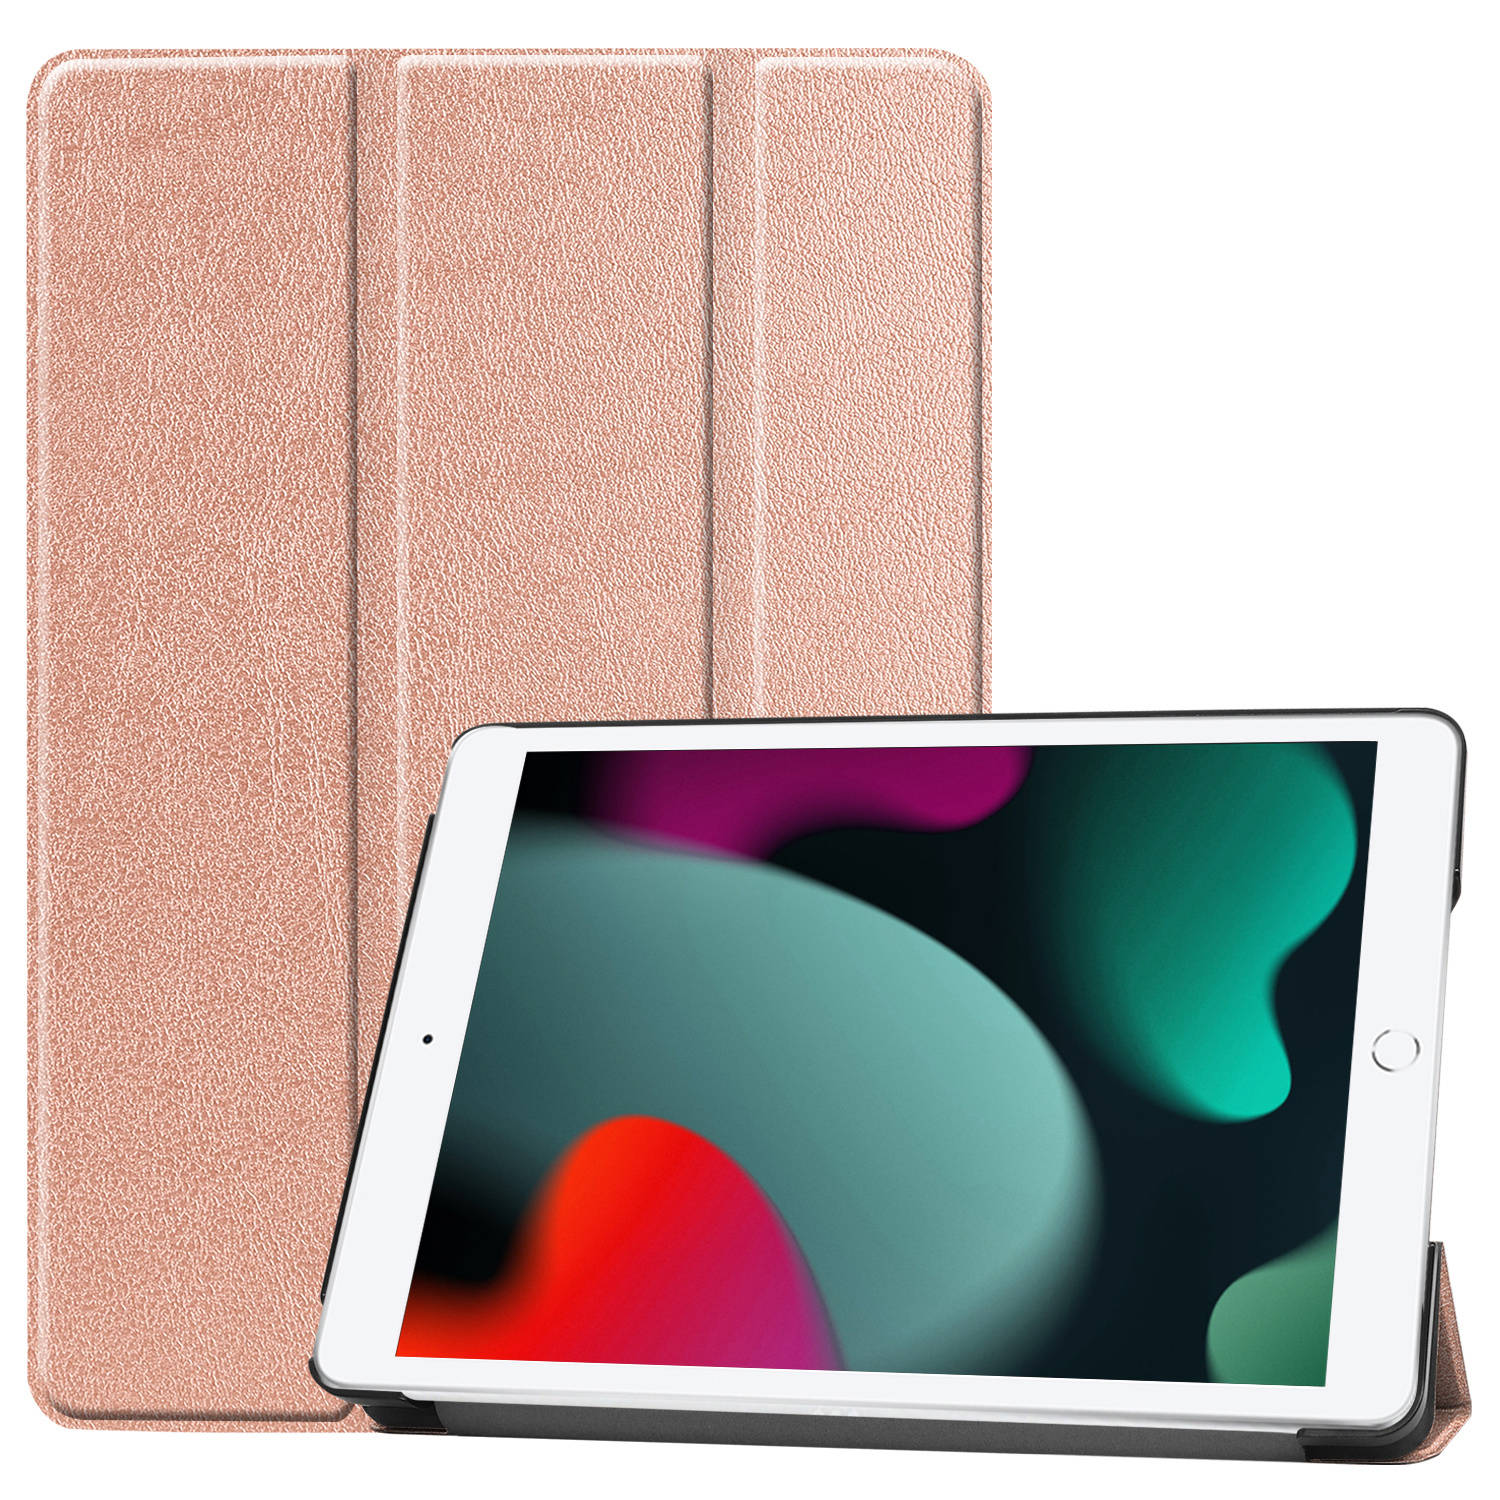 Basey Ipad 10.2 2020 Hoes Book Case Hoesje Ipad 10.2 2020 Hoesje Hard Cover Case Hoes Rose Goud